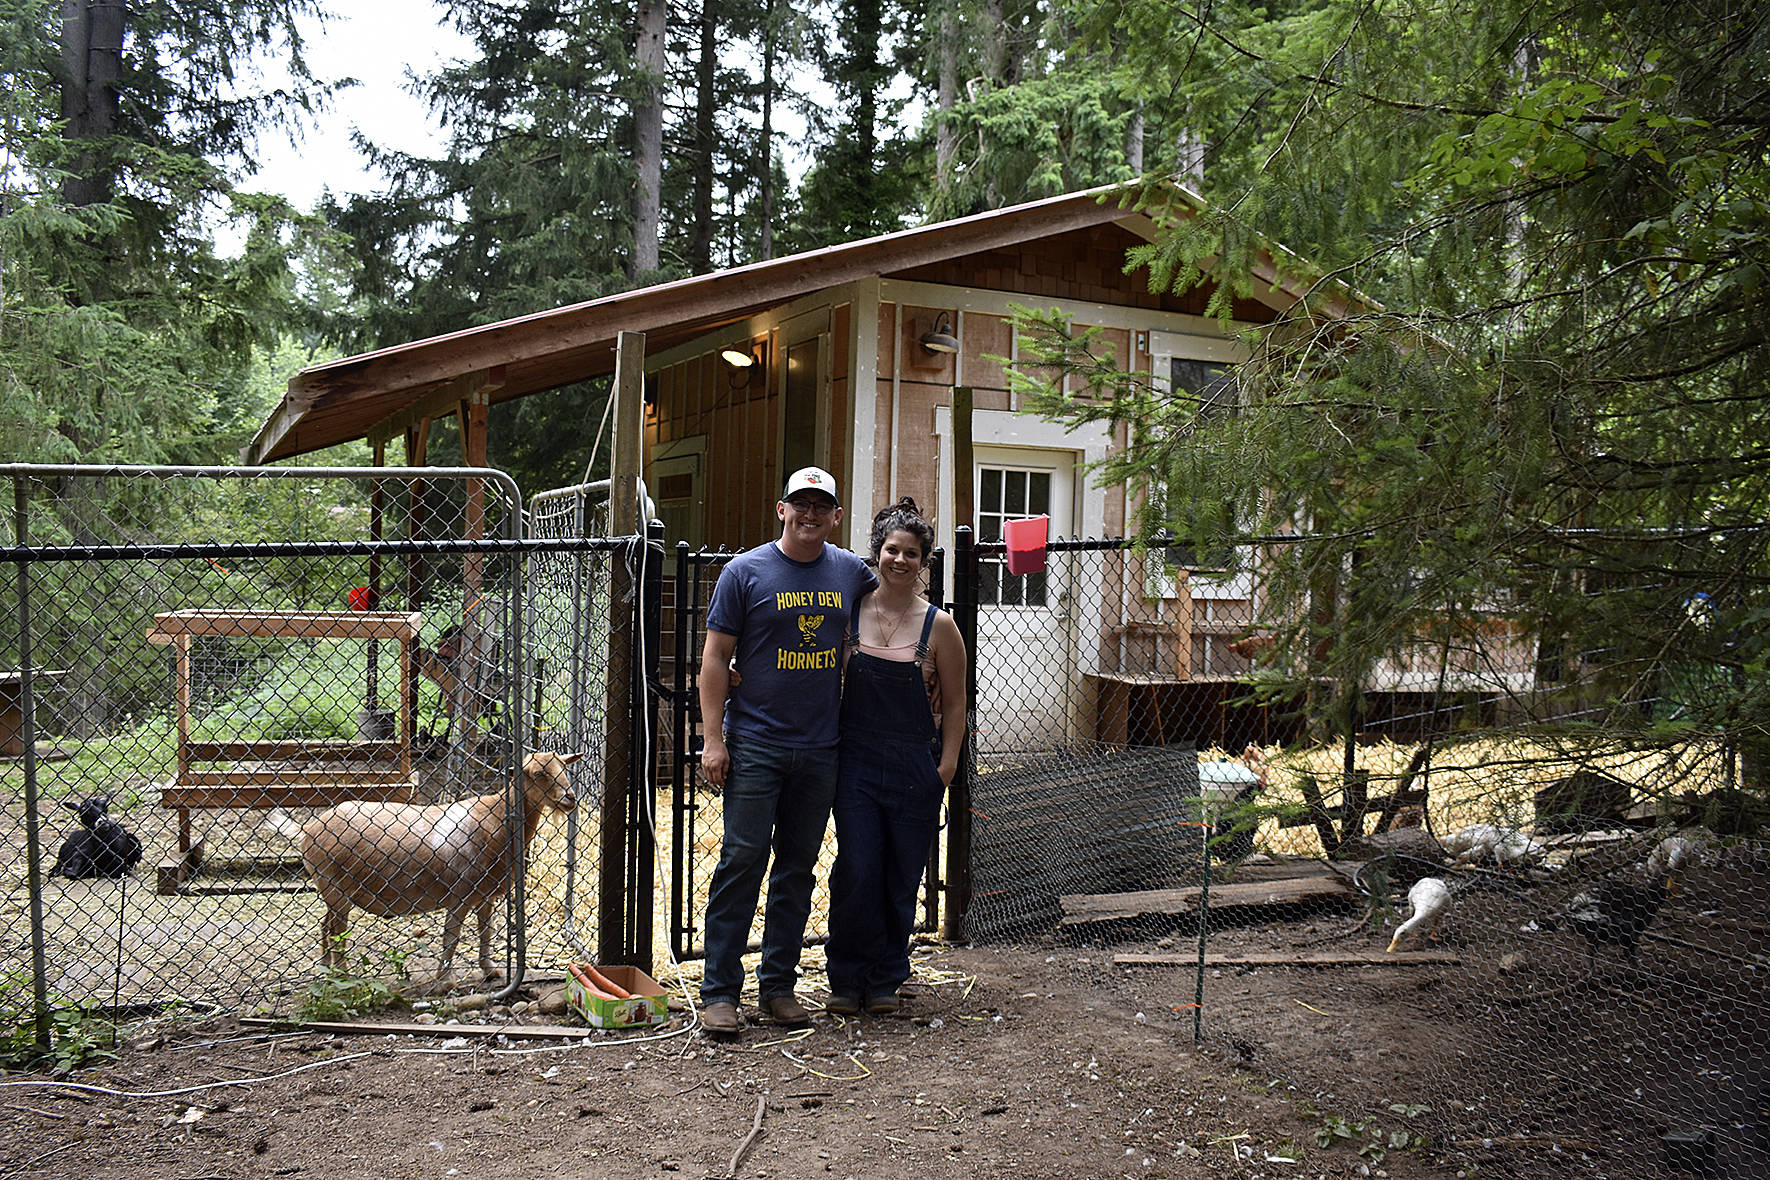 Photos by Haley Ausbun. The BackYardFarm, a local couple trying to help folks with small yards build their own farm, hosted an event July 27, where guests could meet the animals, feed the goats and eat food sourced from their own back yard.